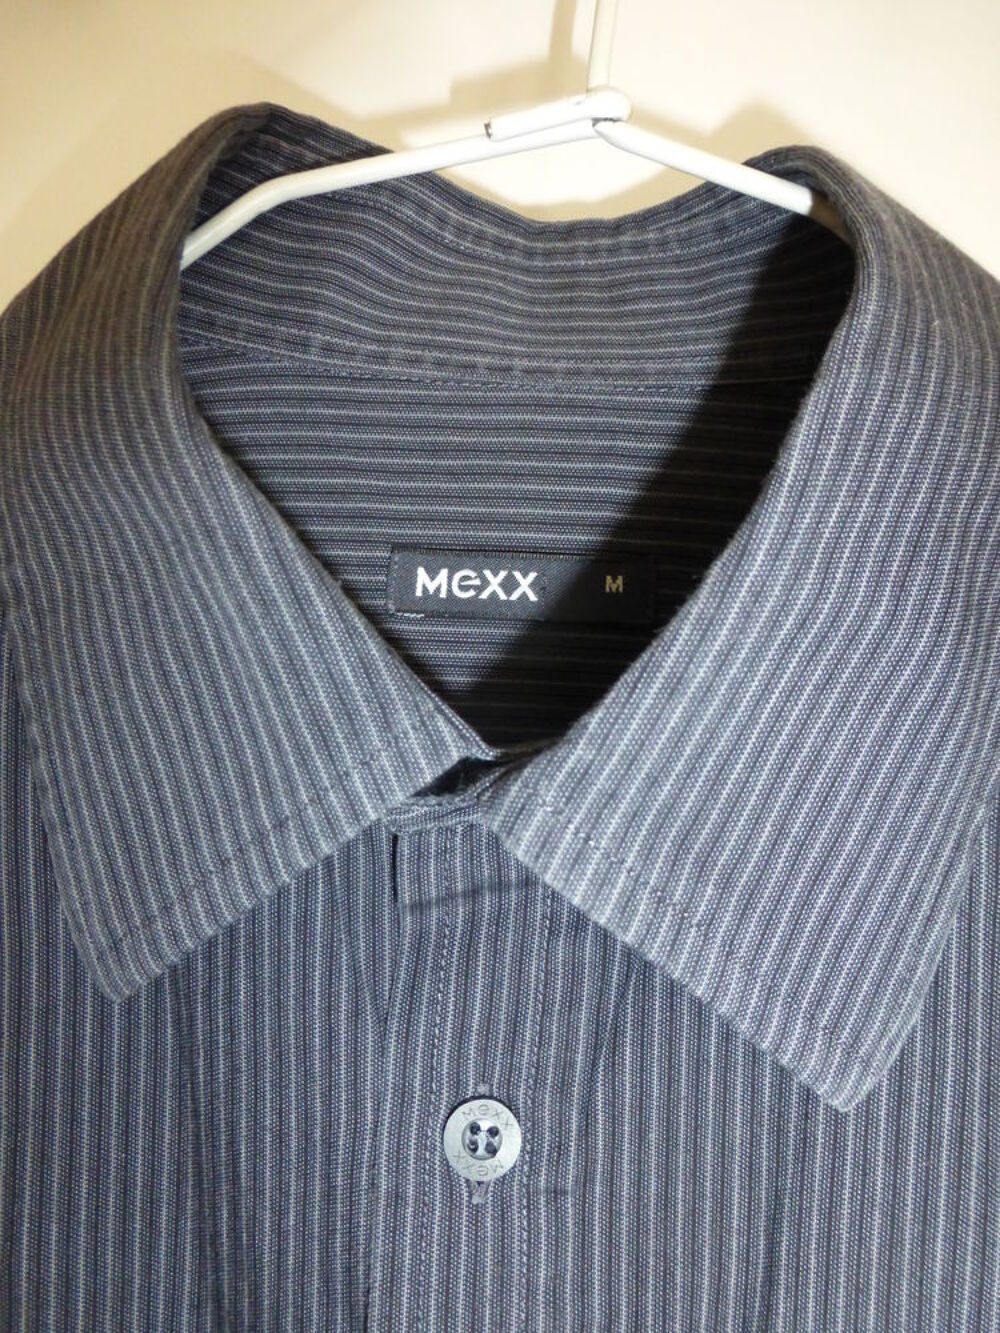 CHEMISE MEXX &agrave; rayures . M .
Vtements